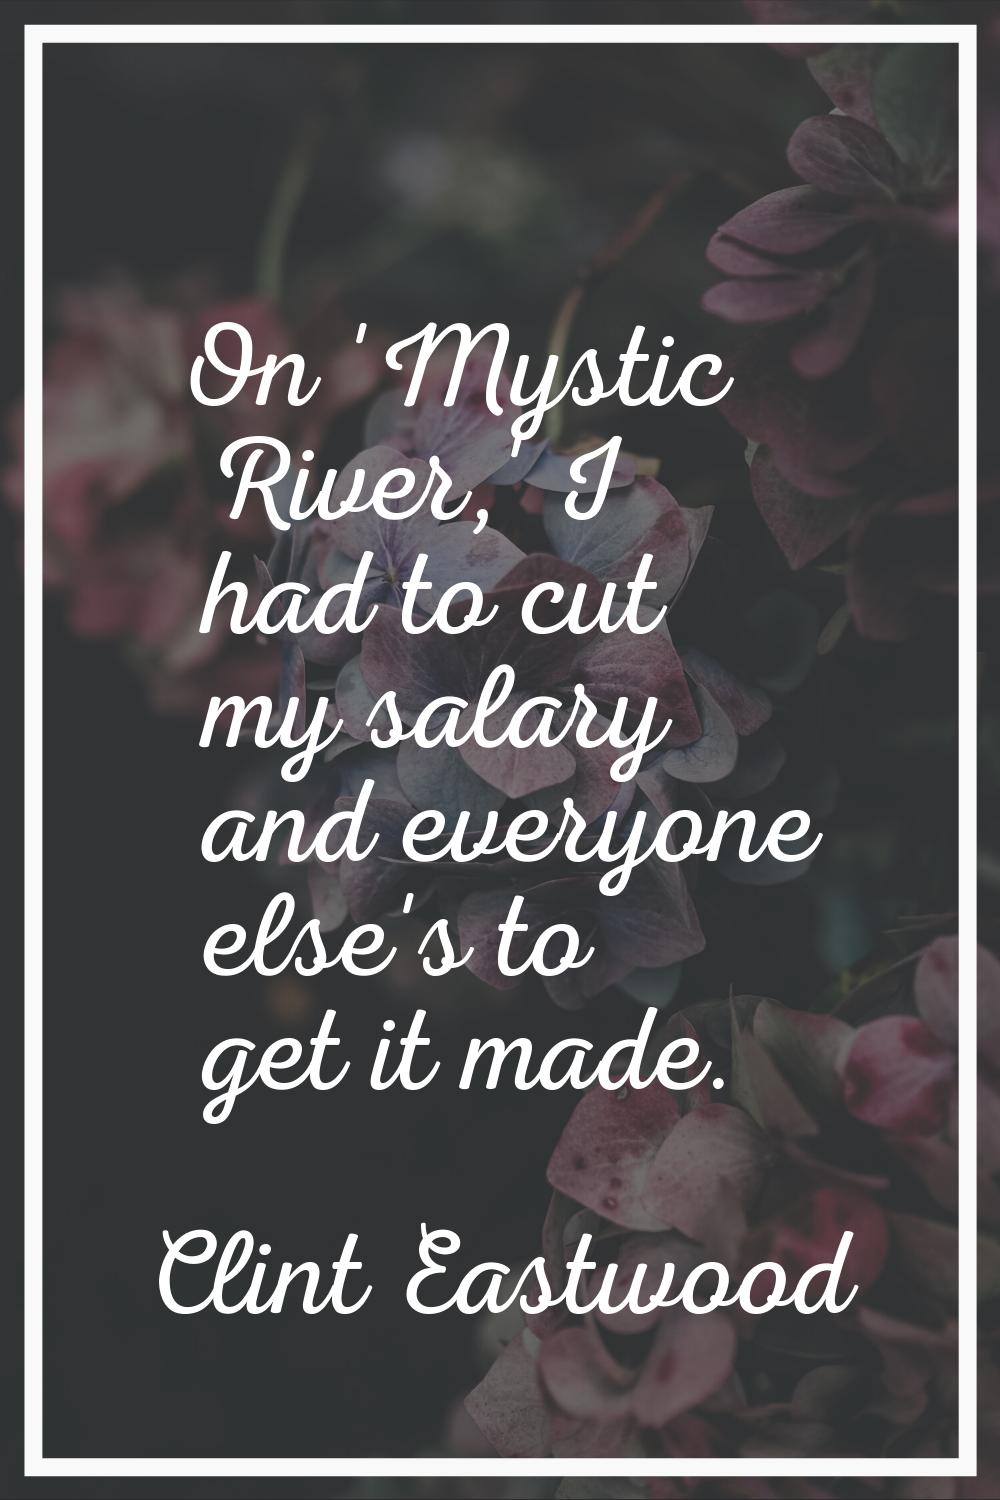 On 'Mystic River,' I had to cut my salary and everyone else's to get it made.